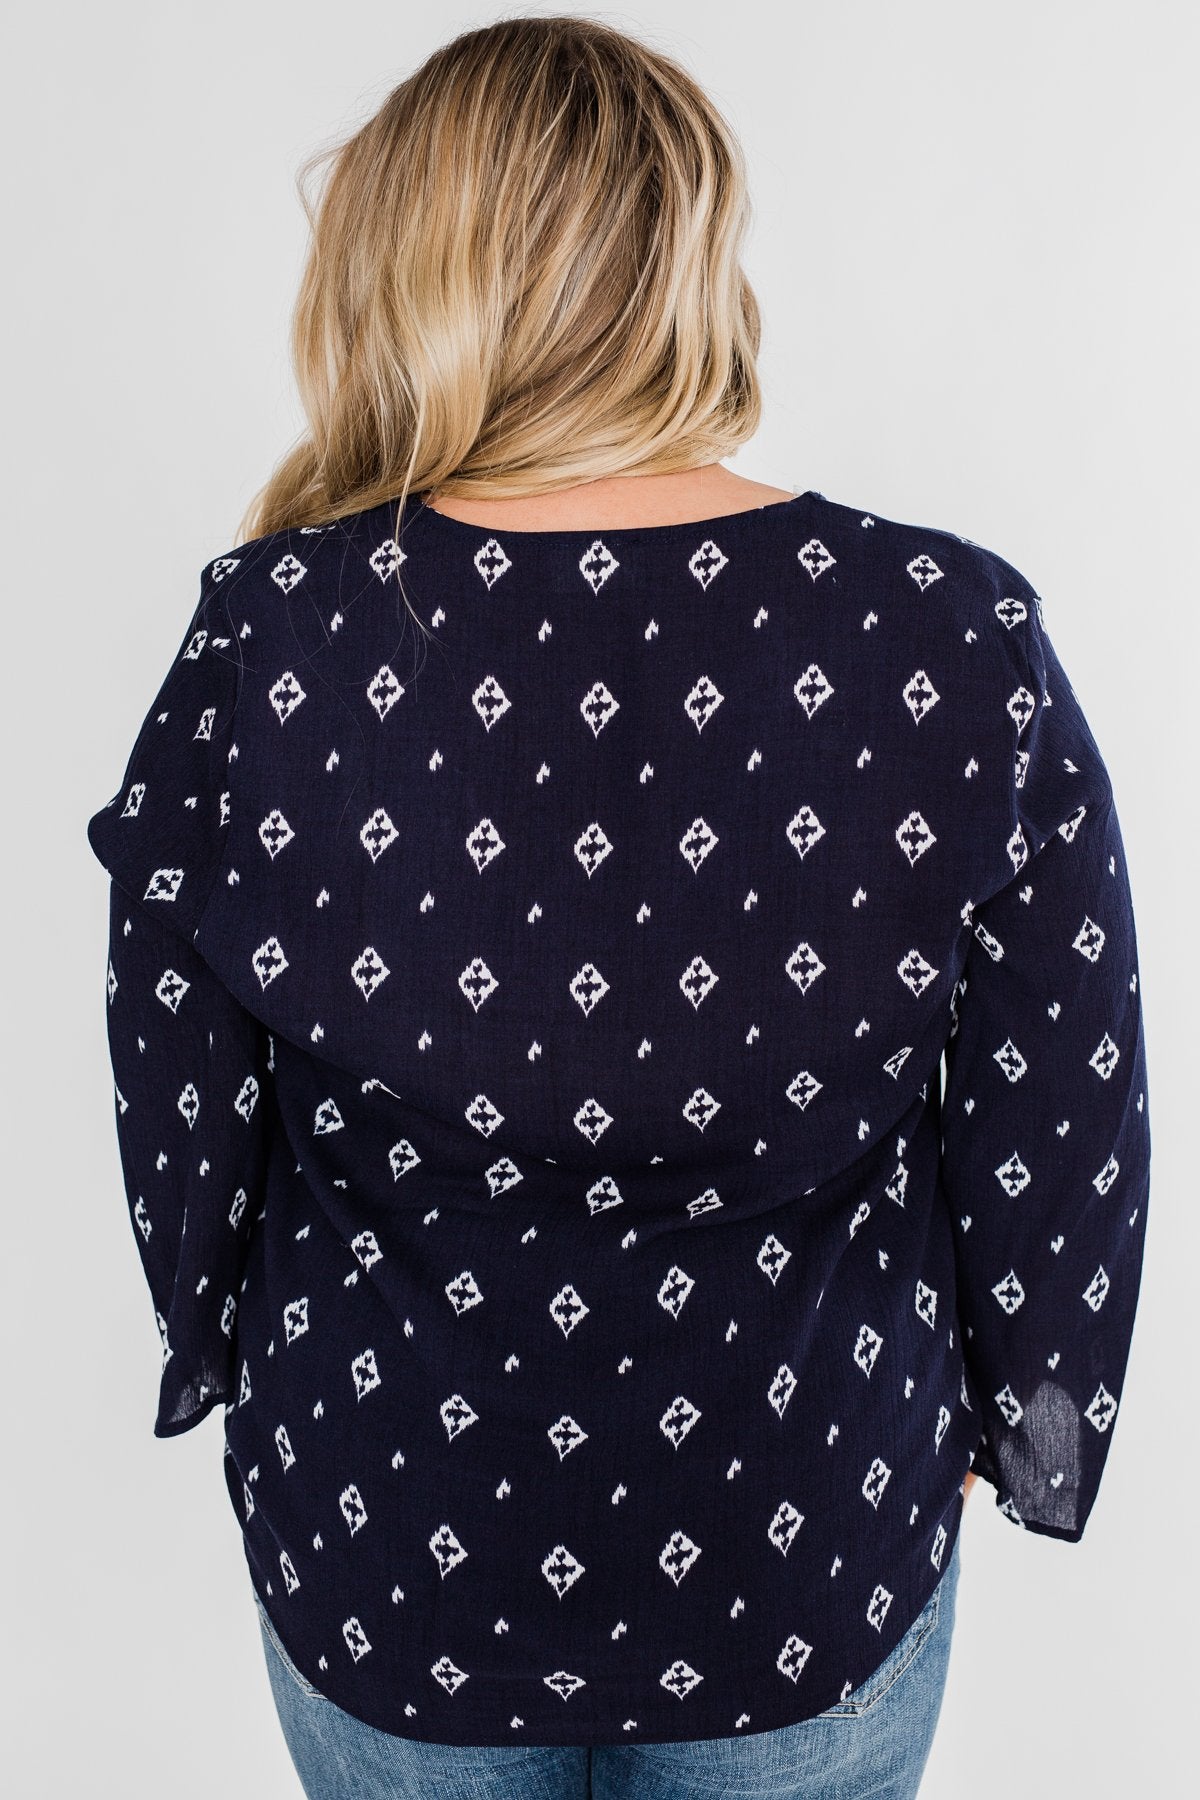 Something About You Printed Tie Blouse- Navy